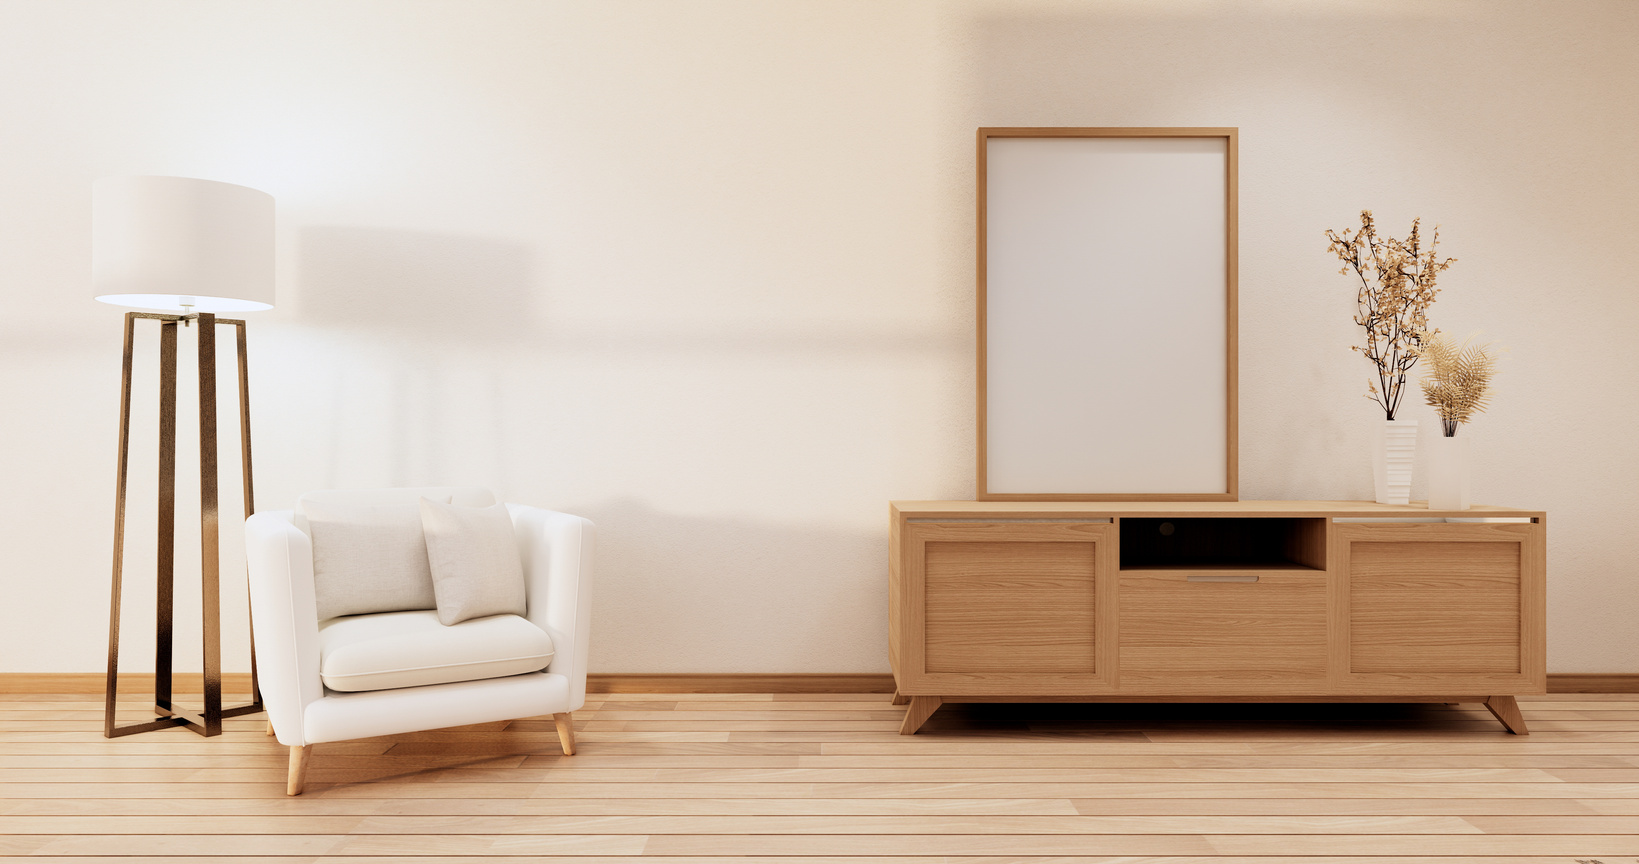 Minimalist - Modern Room Interior with Cabinet TV and Armchair,